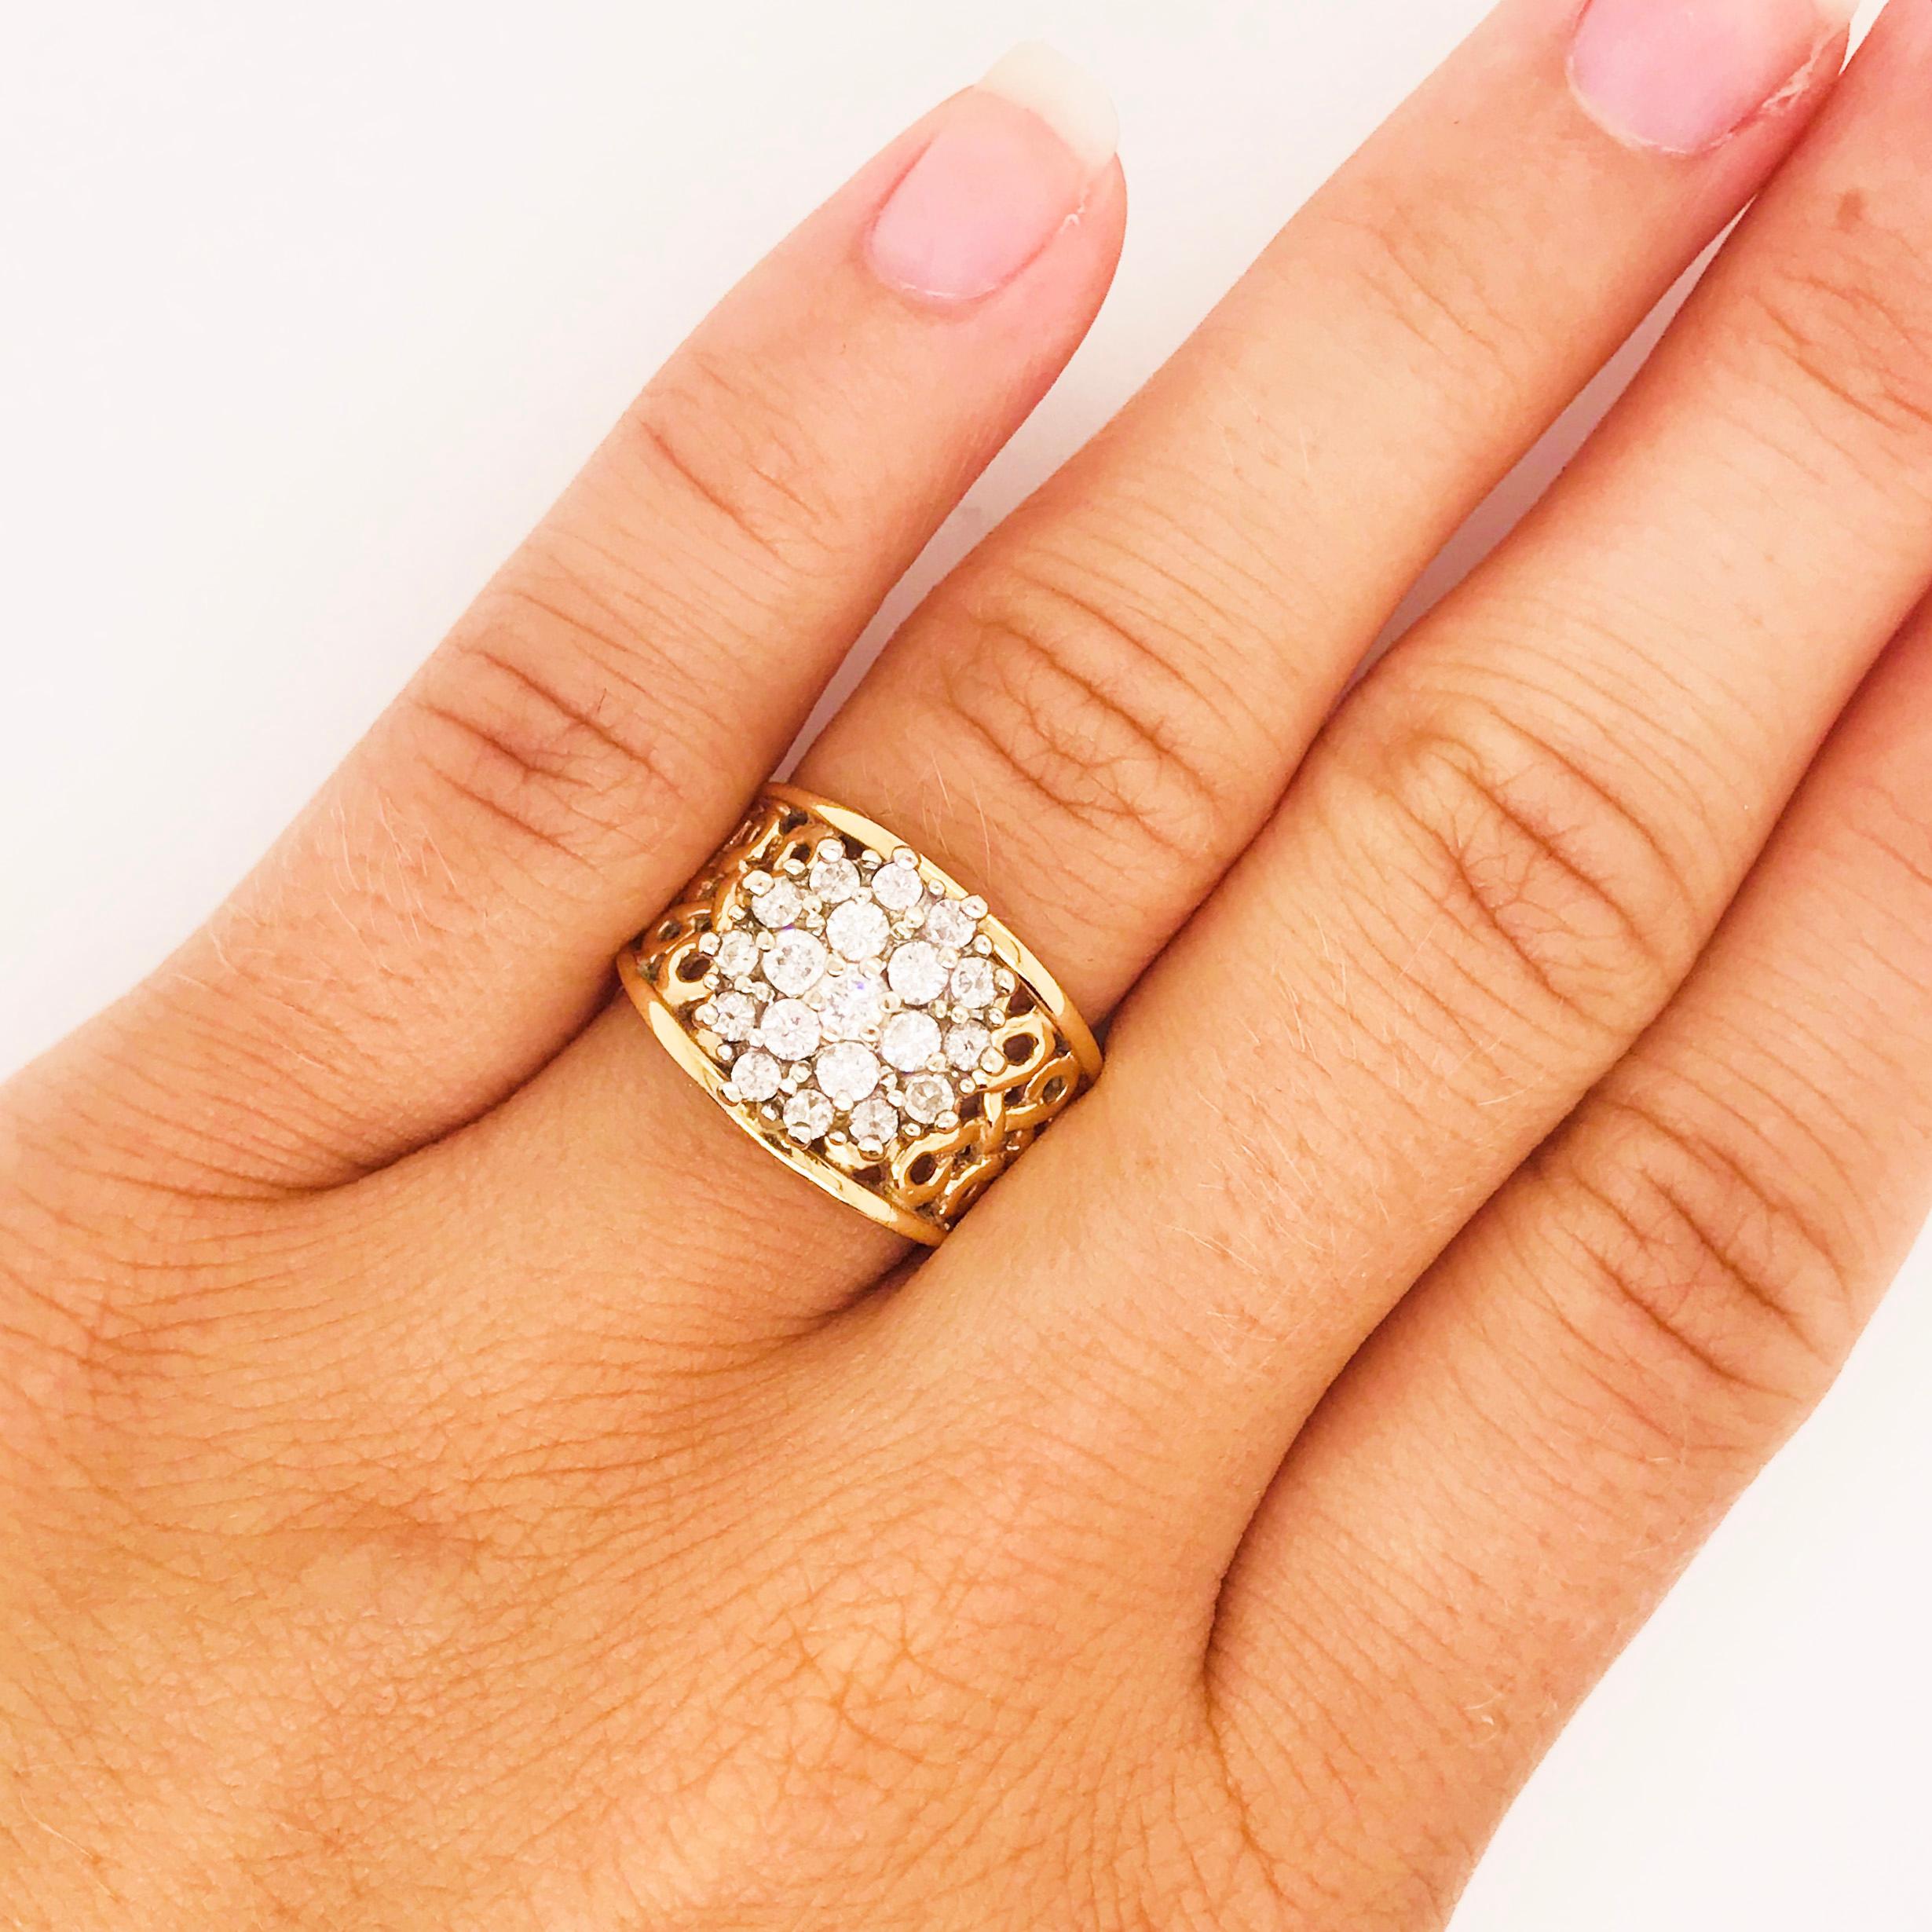 Designer Truglo diamond cluster ring with 1/2 carat of round brilliant diamonds! This stunning ring has a very special design. The top of the ring is a diamond cluster made of three layers of round brilliant diamonds set in a perfect round cluster